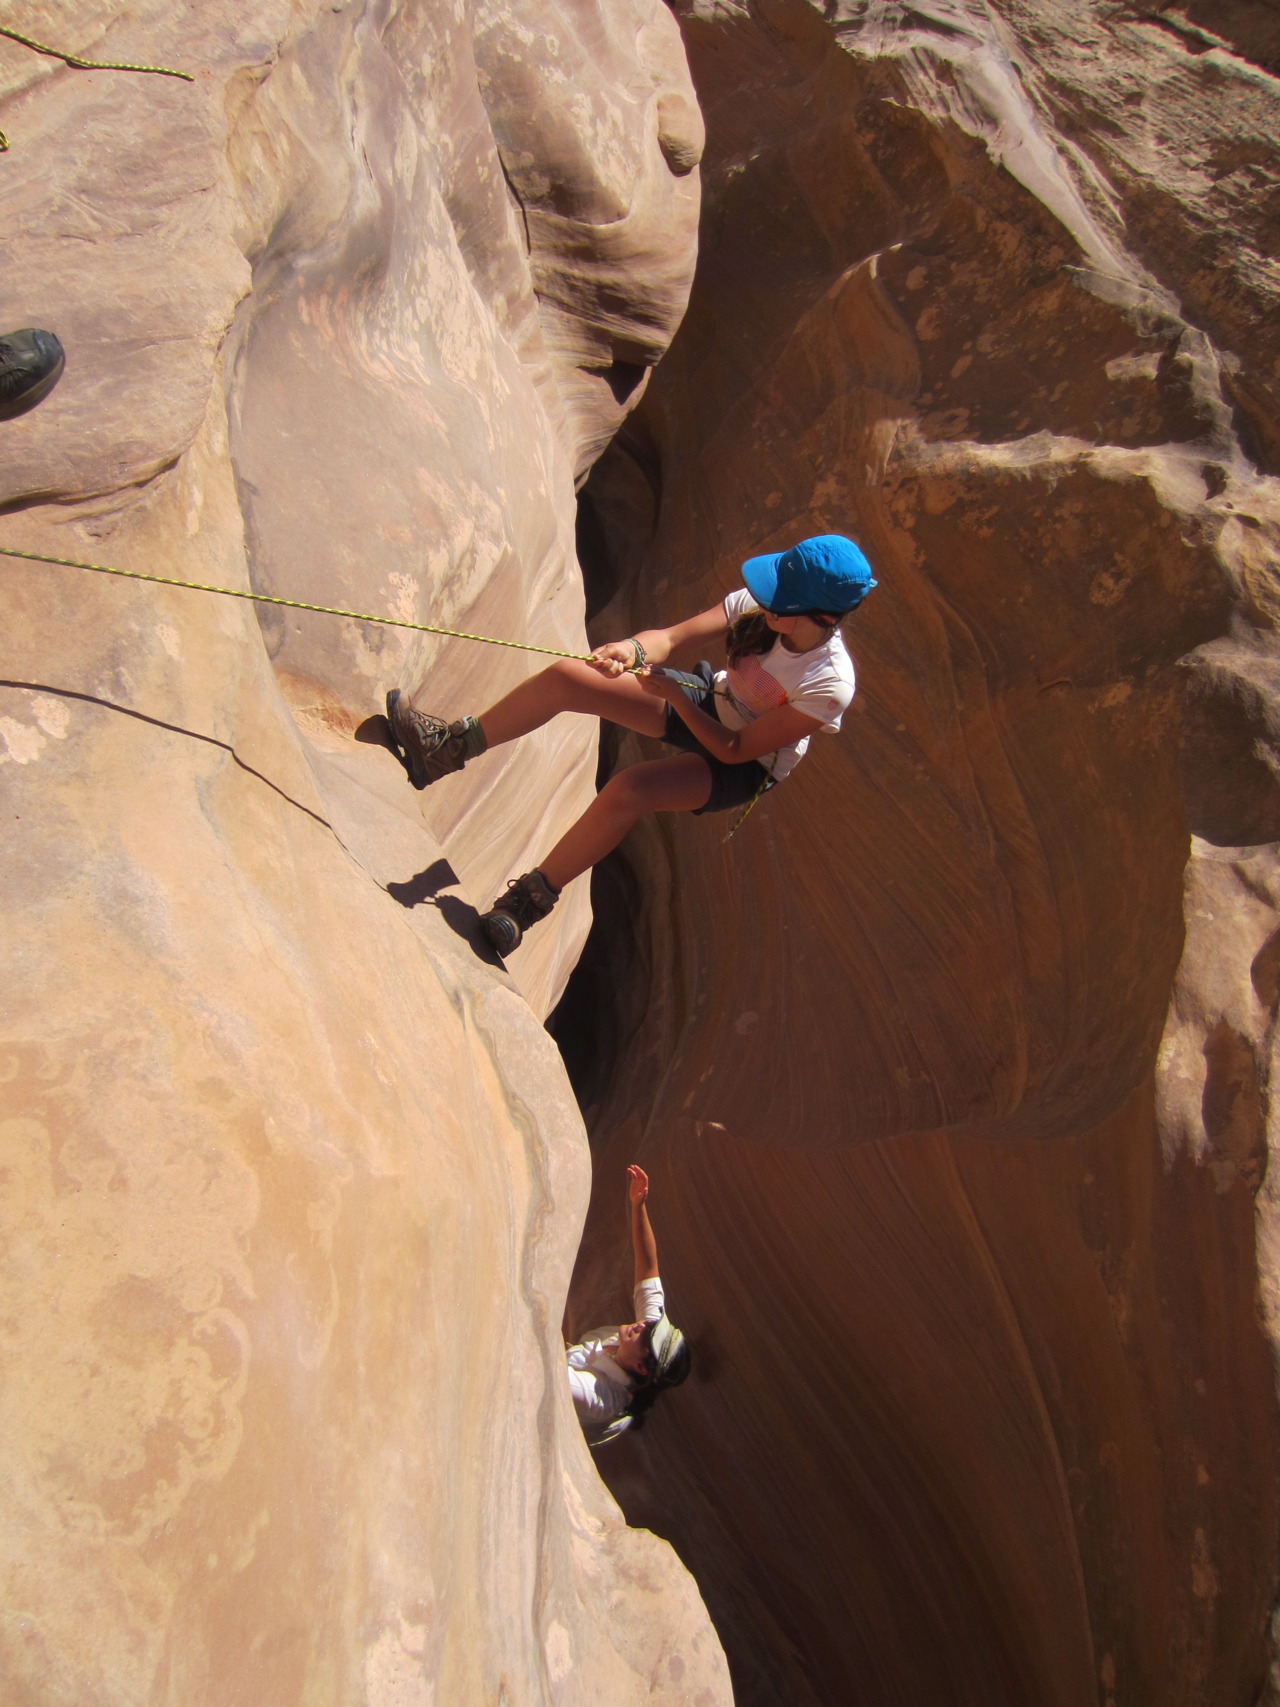 My daughter rappelling down a slot canyon in Utah, during a trip her 7th grade class took with the National Outdoor Leadership School last week. She&#8217;s so much braver than me!